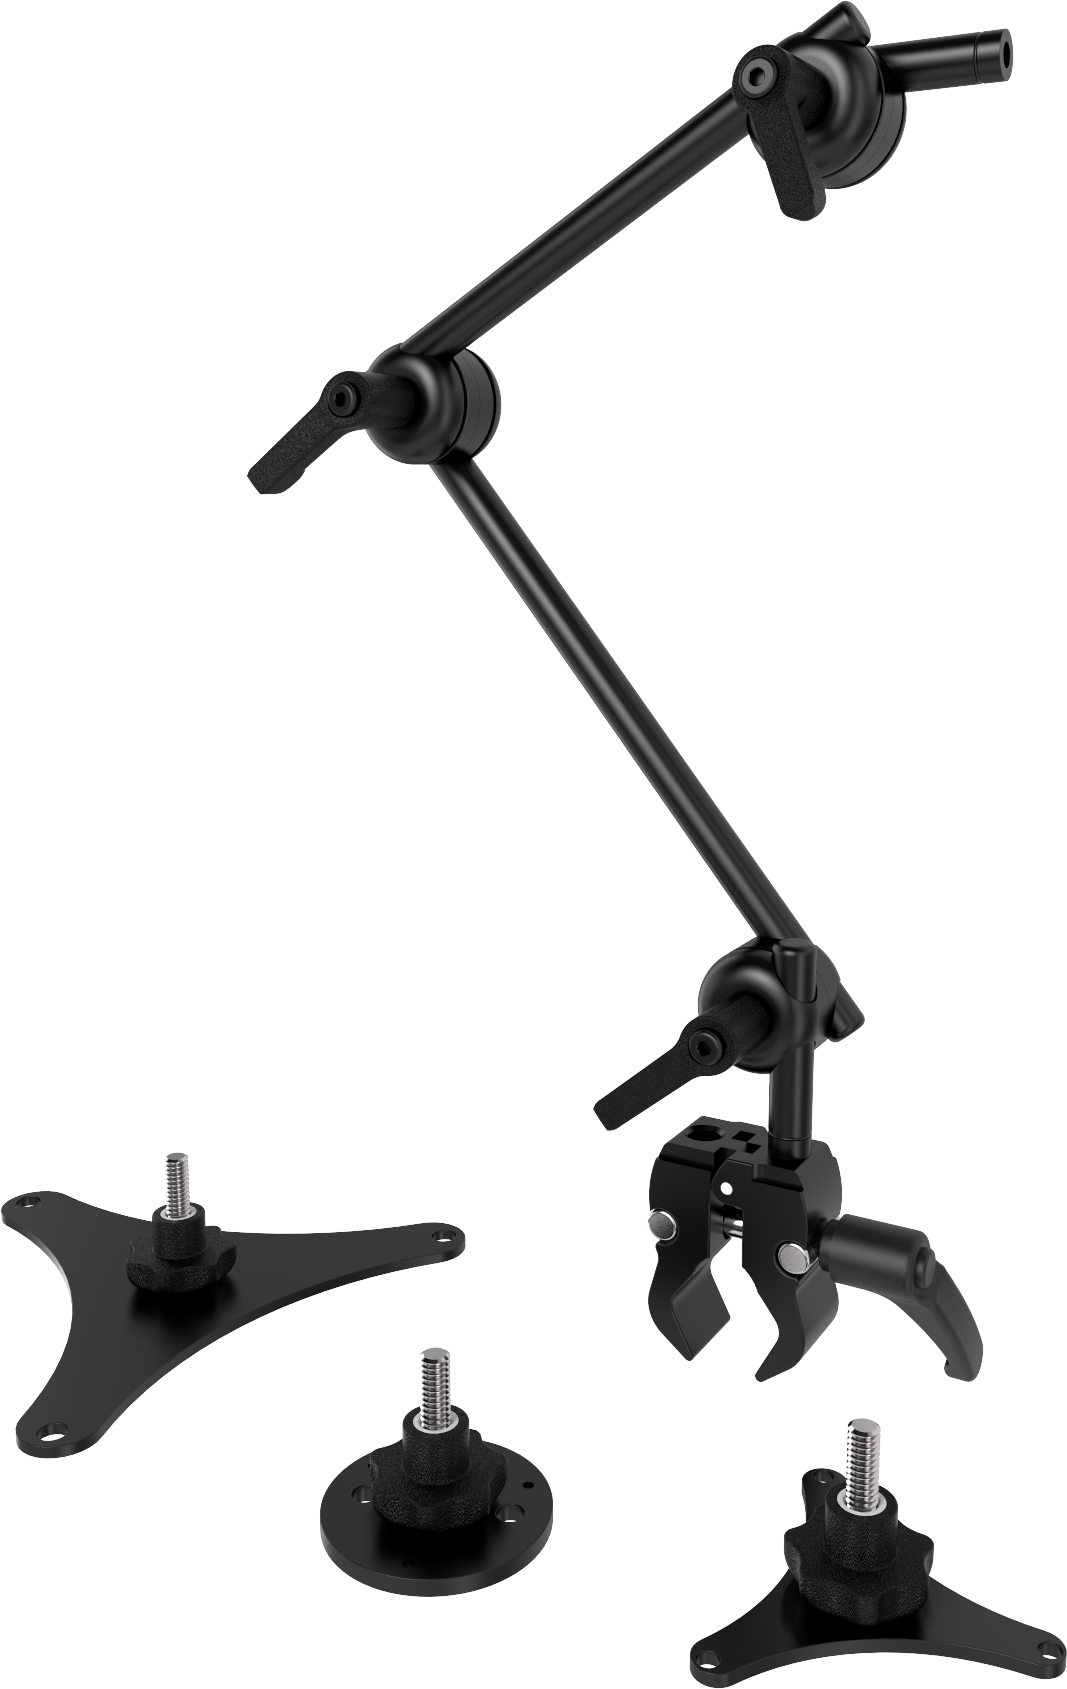 Universal mount kit for switches, to mount them to a wheelchair. Includes small Tube clamp, two tubes, QuickShift joints and the three most popular switch mount plates, by Rehadapt